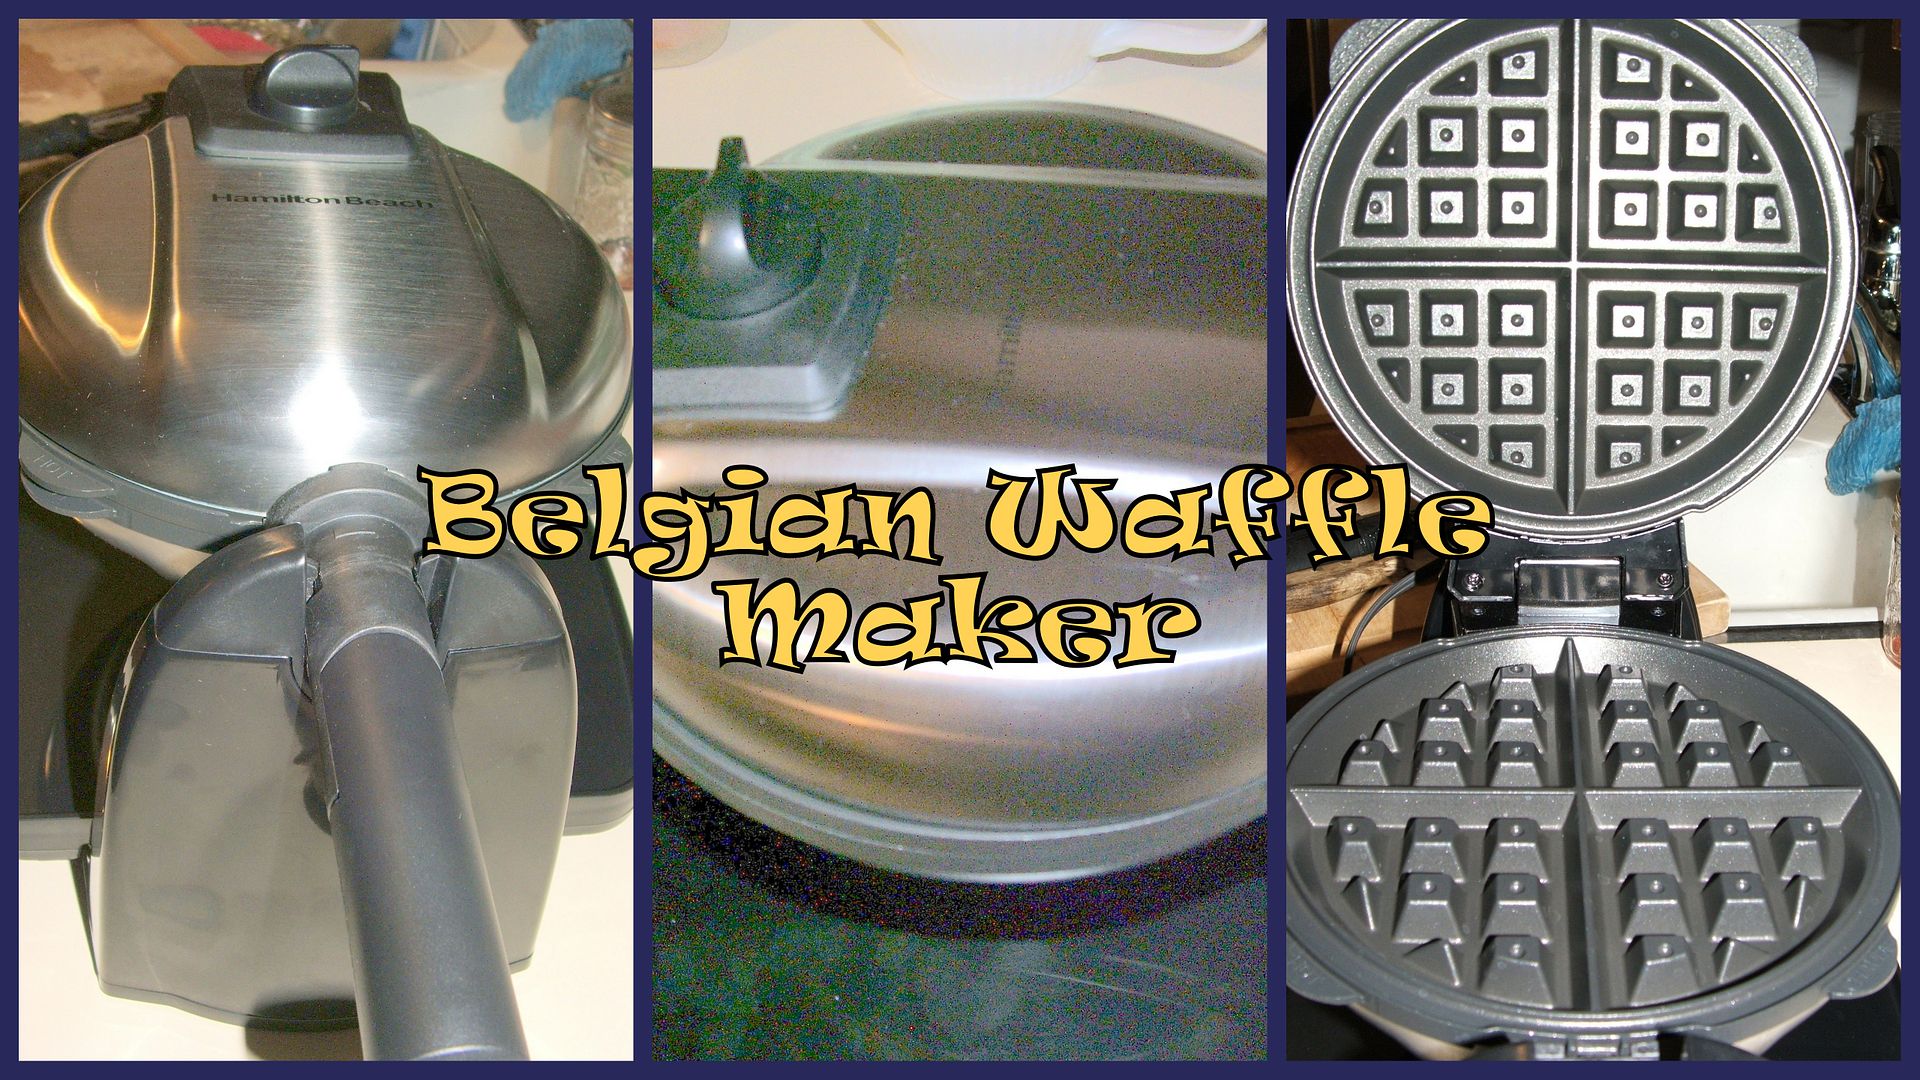 Belgian Waffle Maker by Angie Ouellette-Tower for godsgrowinggarden.com photo 2013-04-18_zps97f87251.jpg